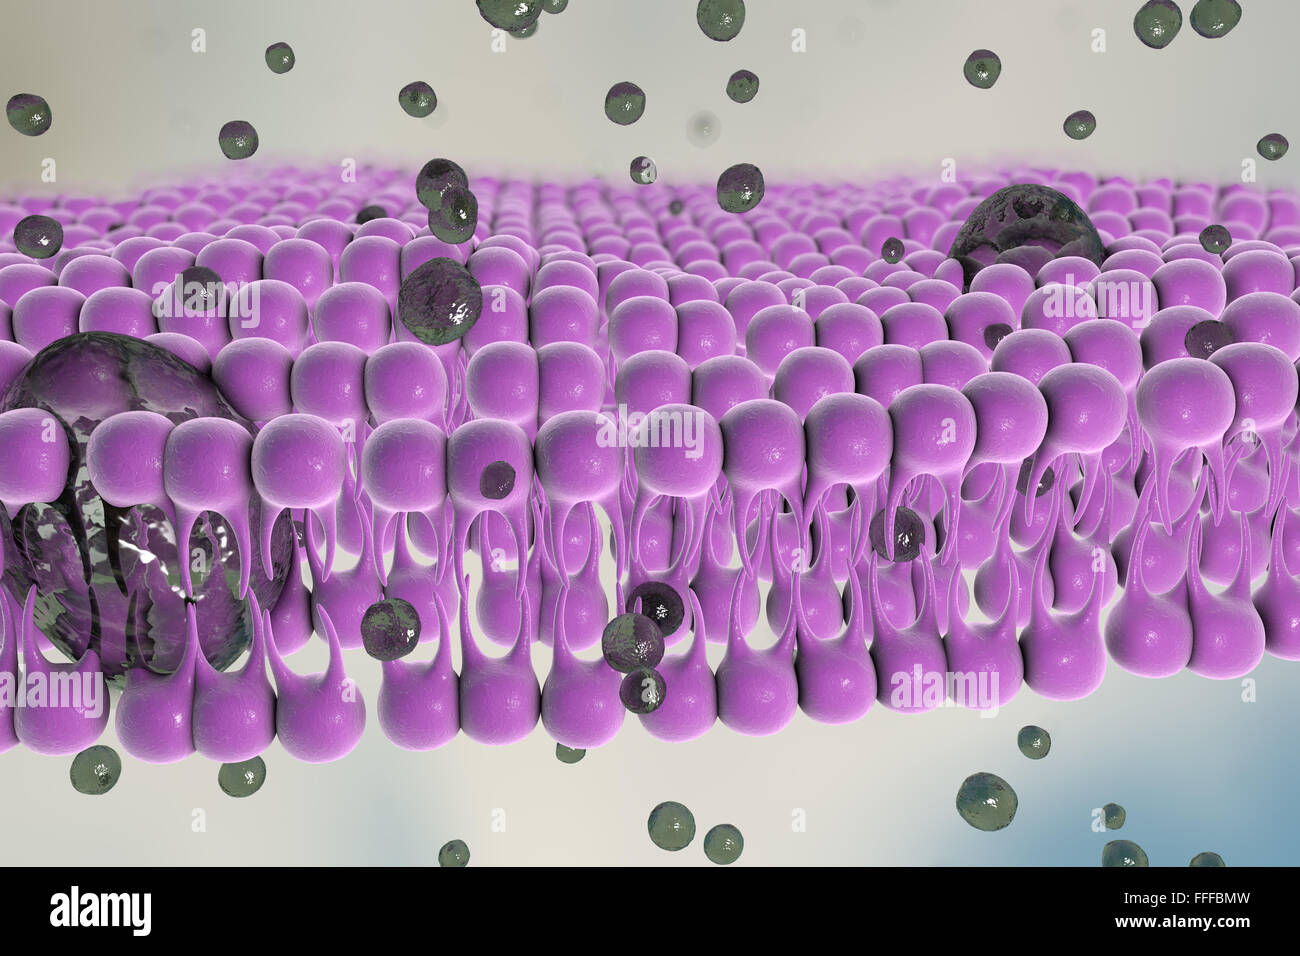 Plasma membrane. Illustration of the structure of the plasma membrane that encloses cells. The membrane is a bilayer of Stock Photo